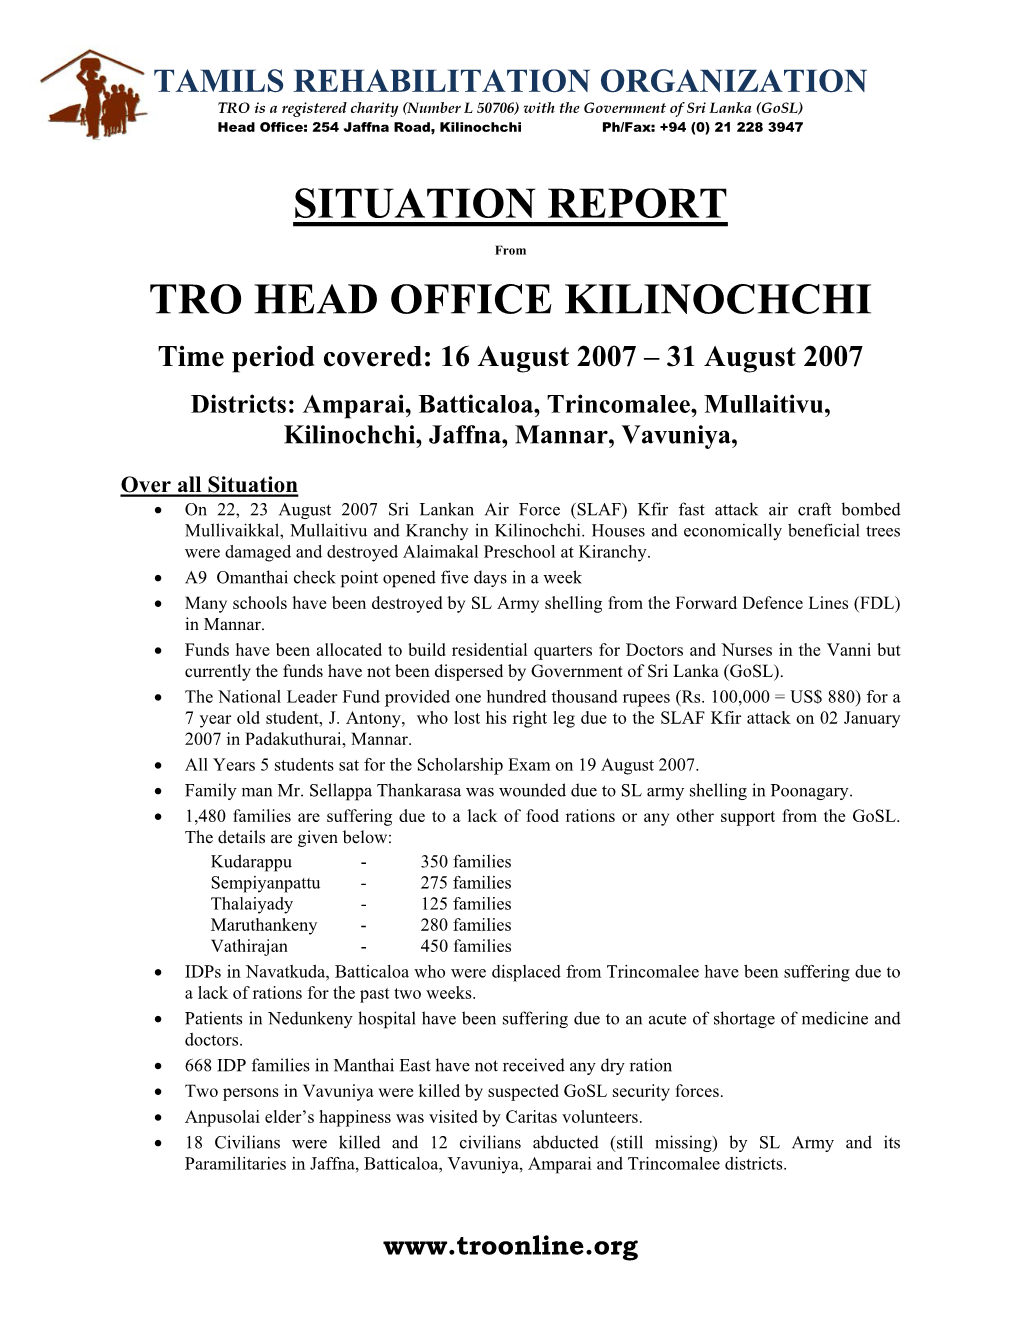 TRO Situation Report August 16-31 2007